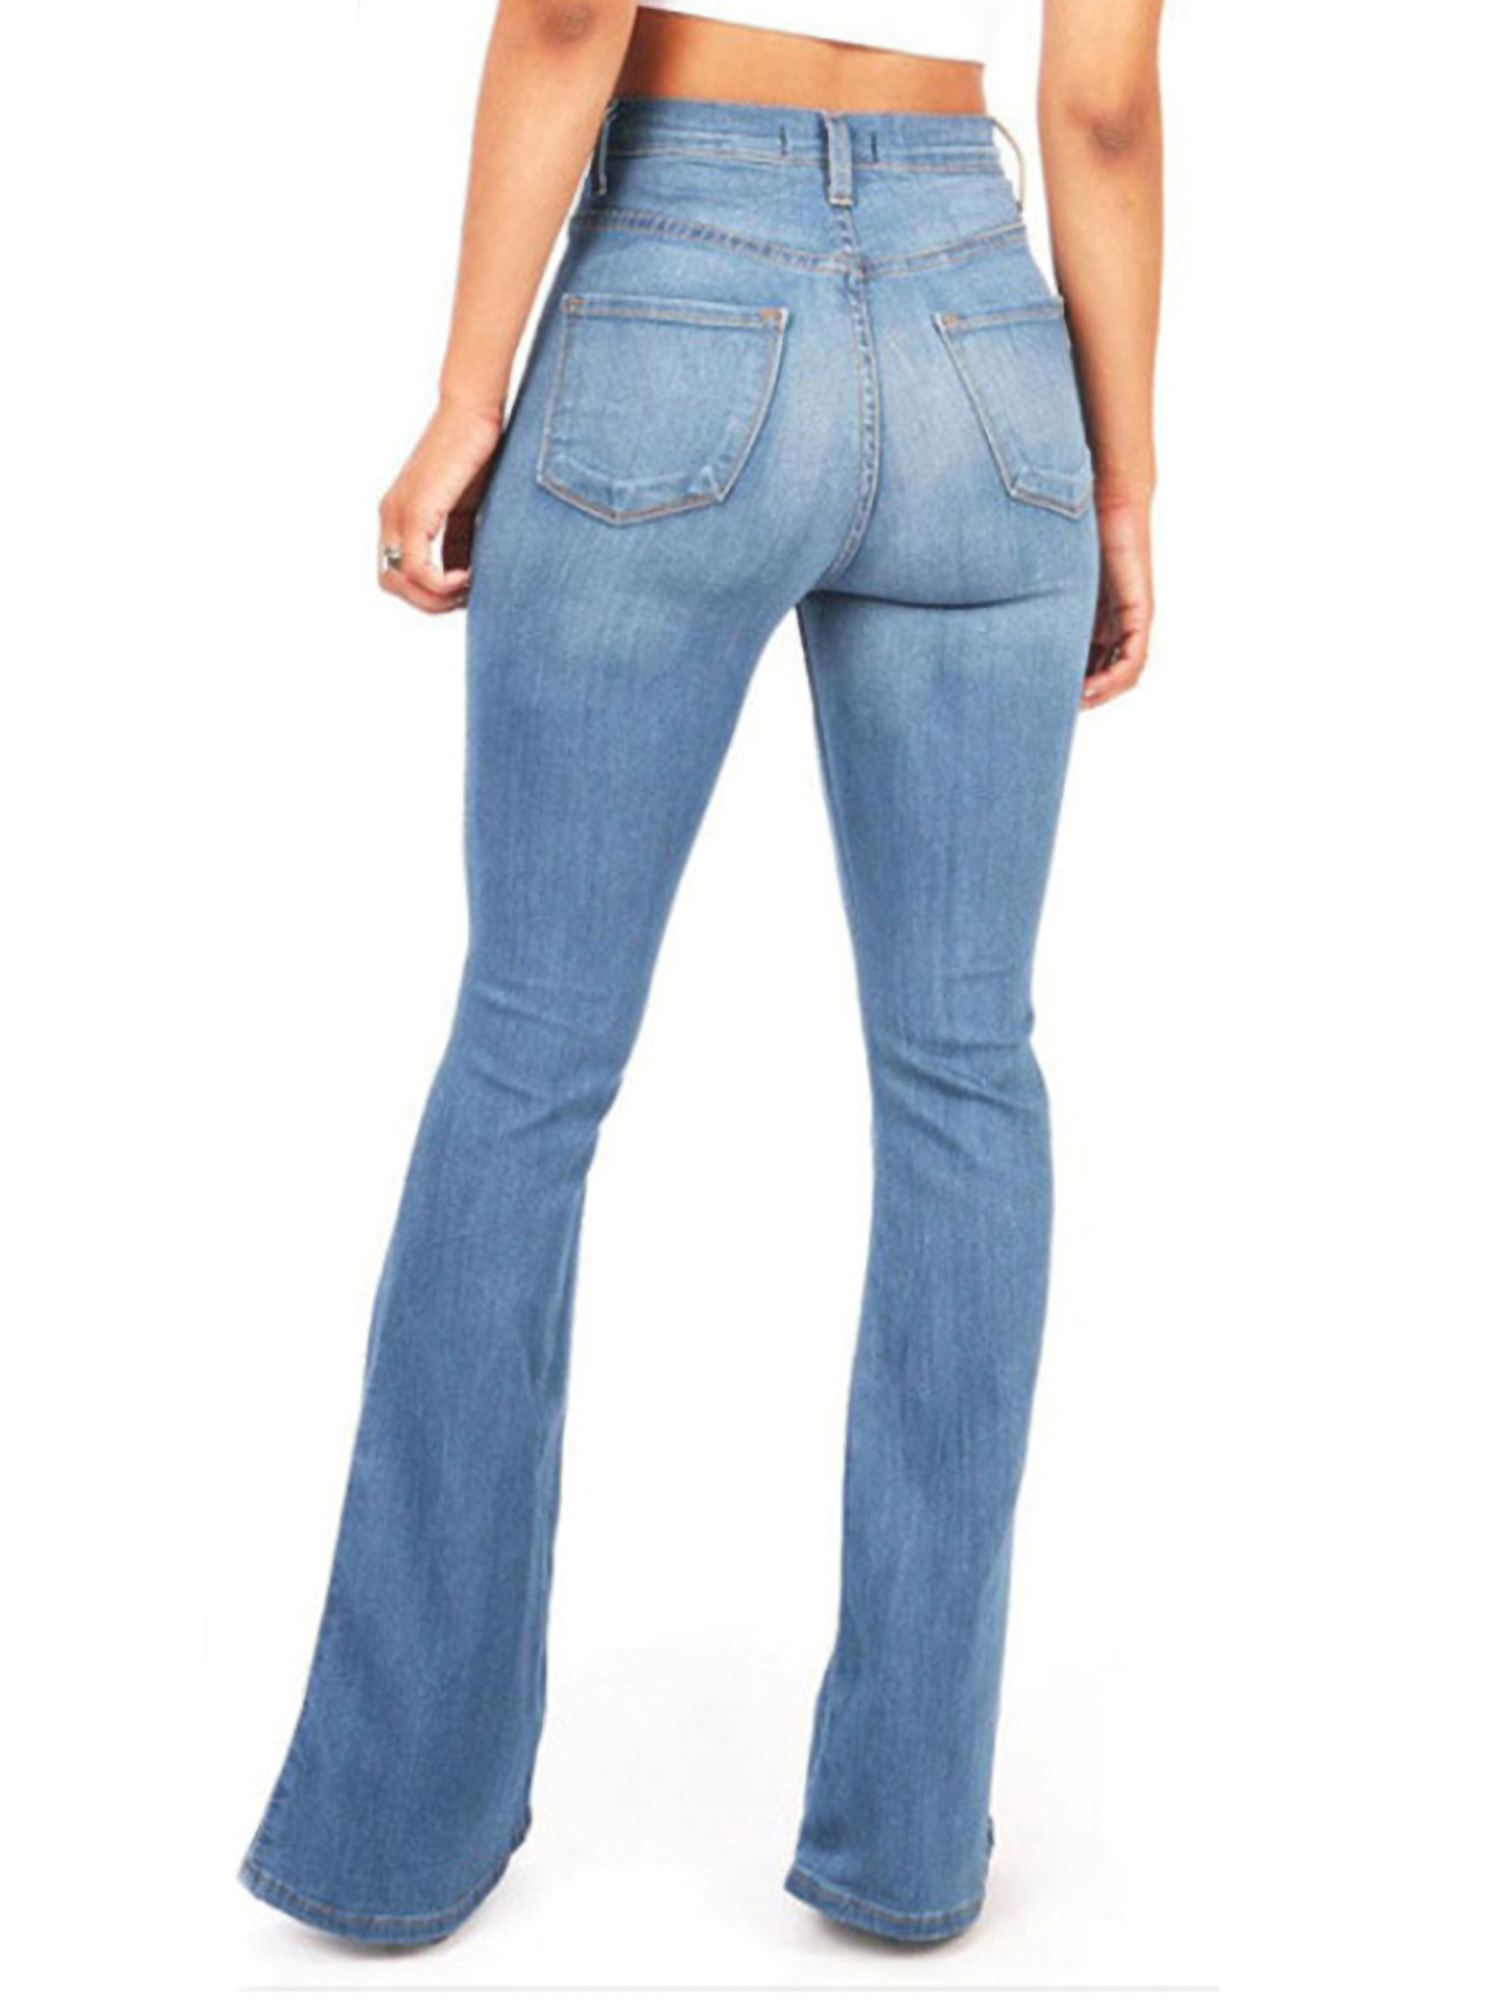 Bell Bottoms Denim Pants for Women Casual Slim Fit Flare Jeans High Rise Denim Jeans Trousers - image 3 of 3